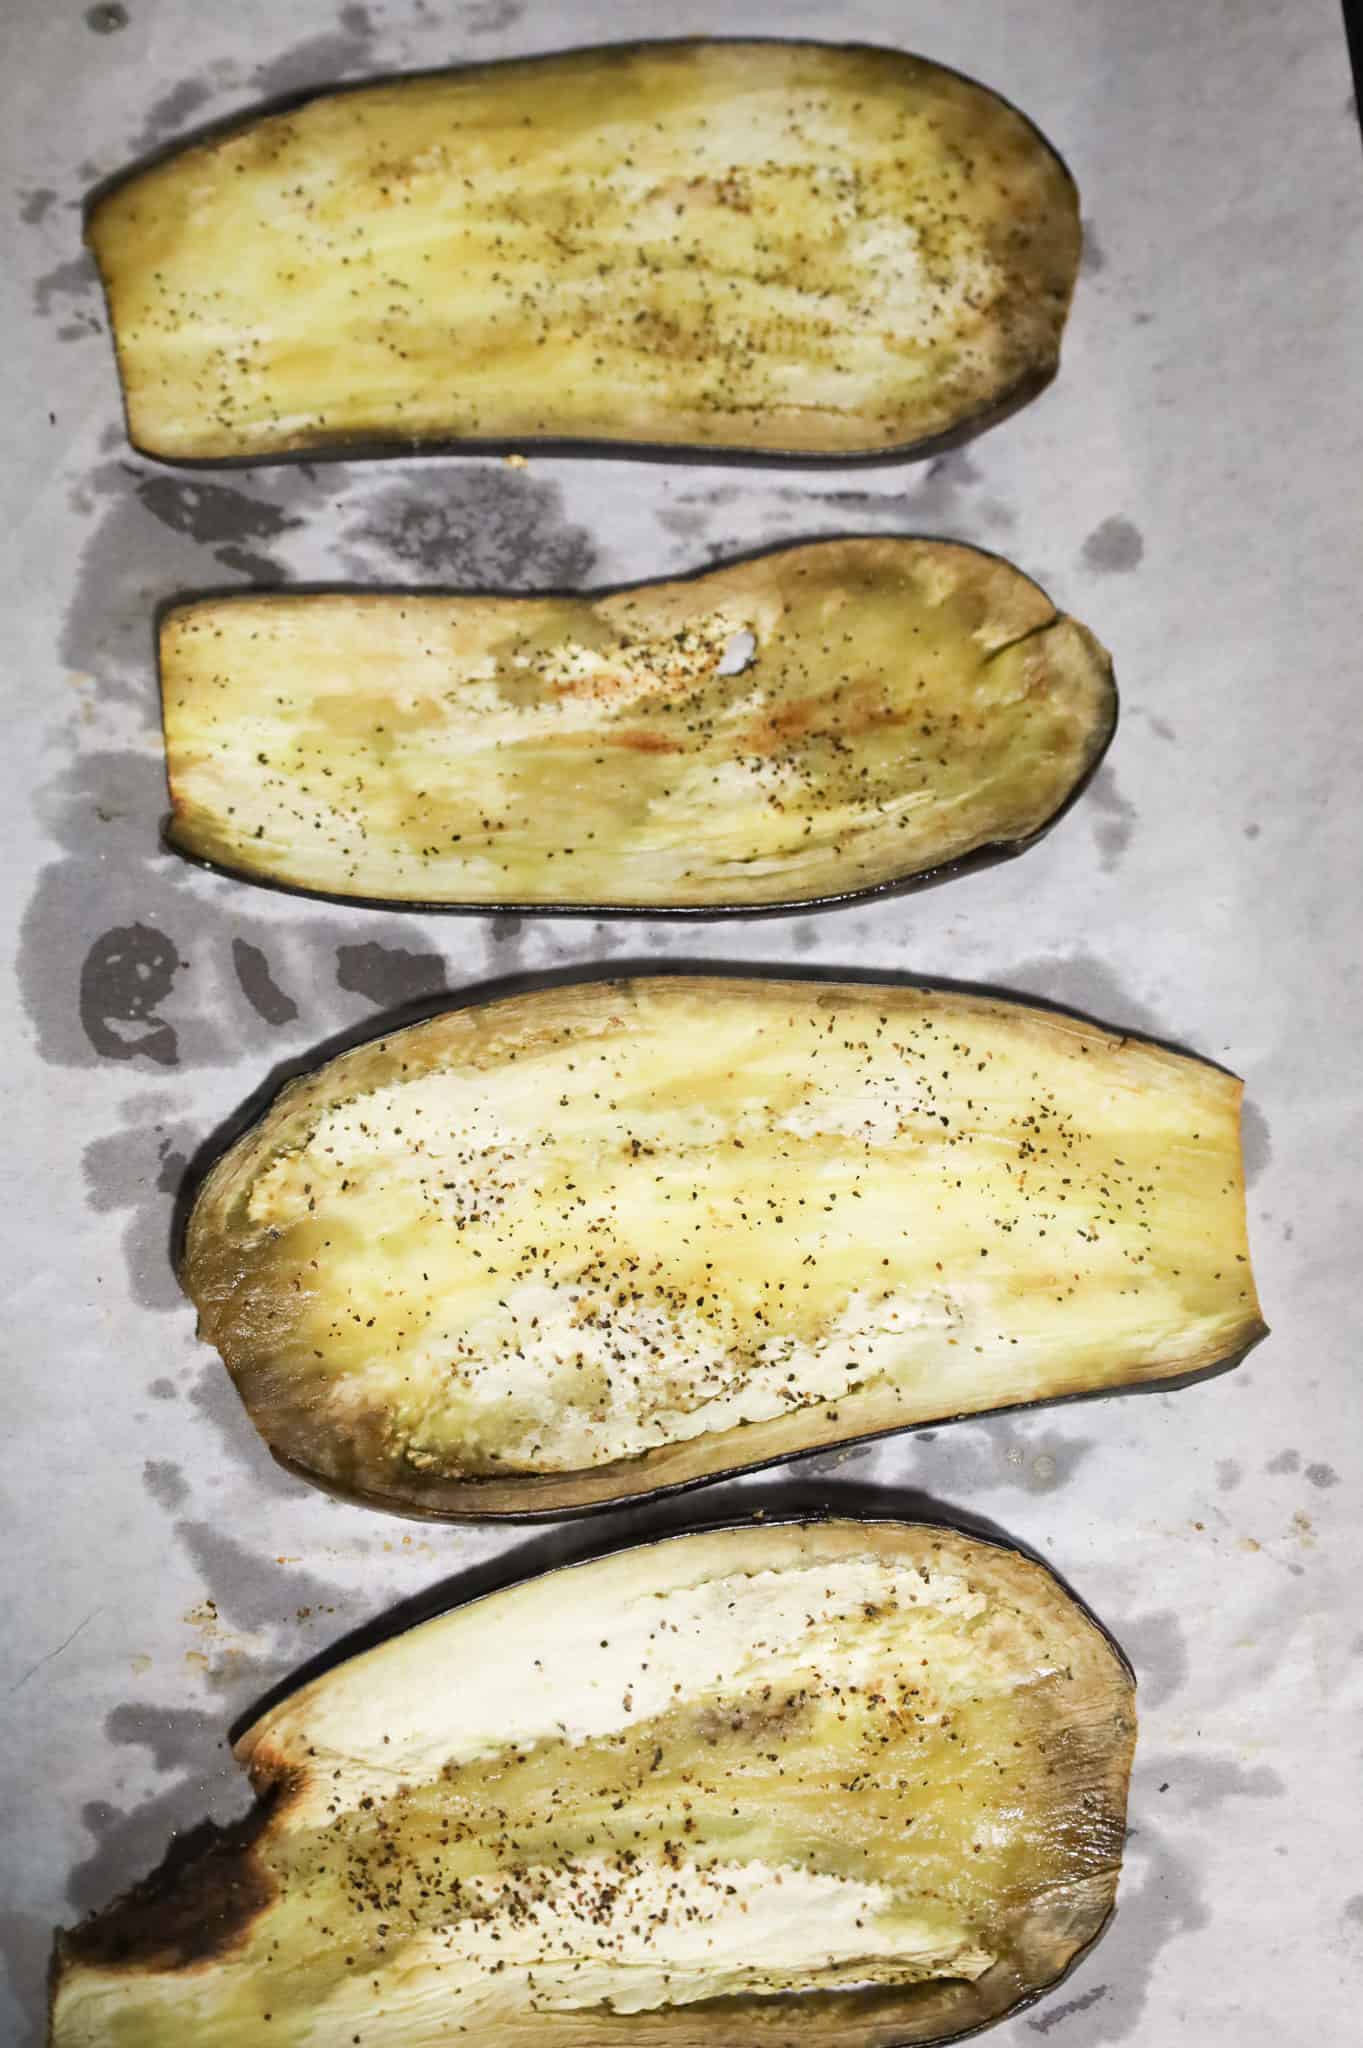 roasted eggplant slices on a parchment lined baking sheet